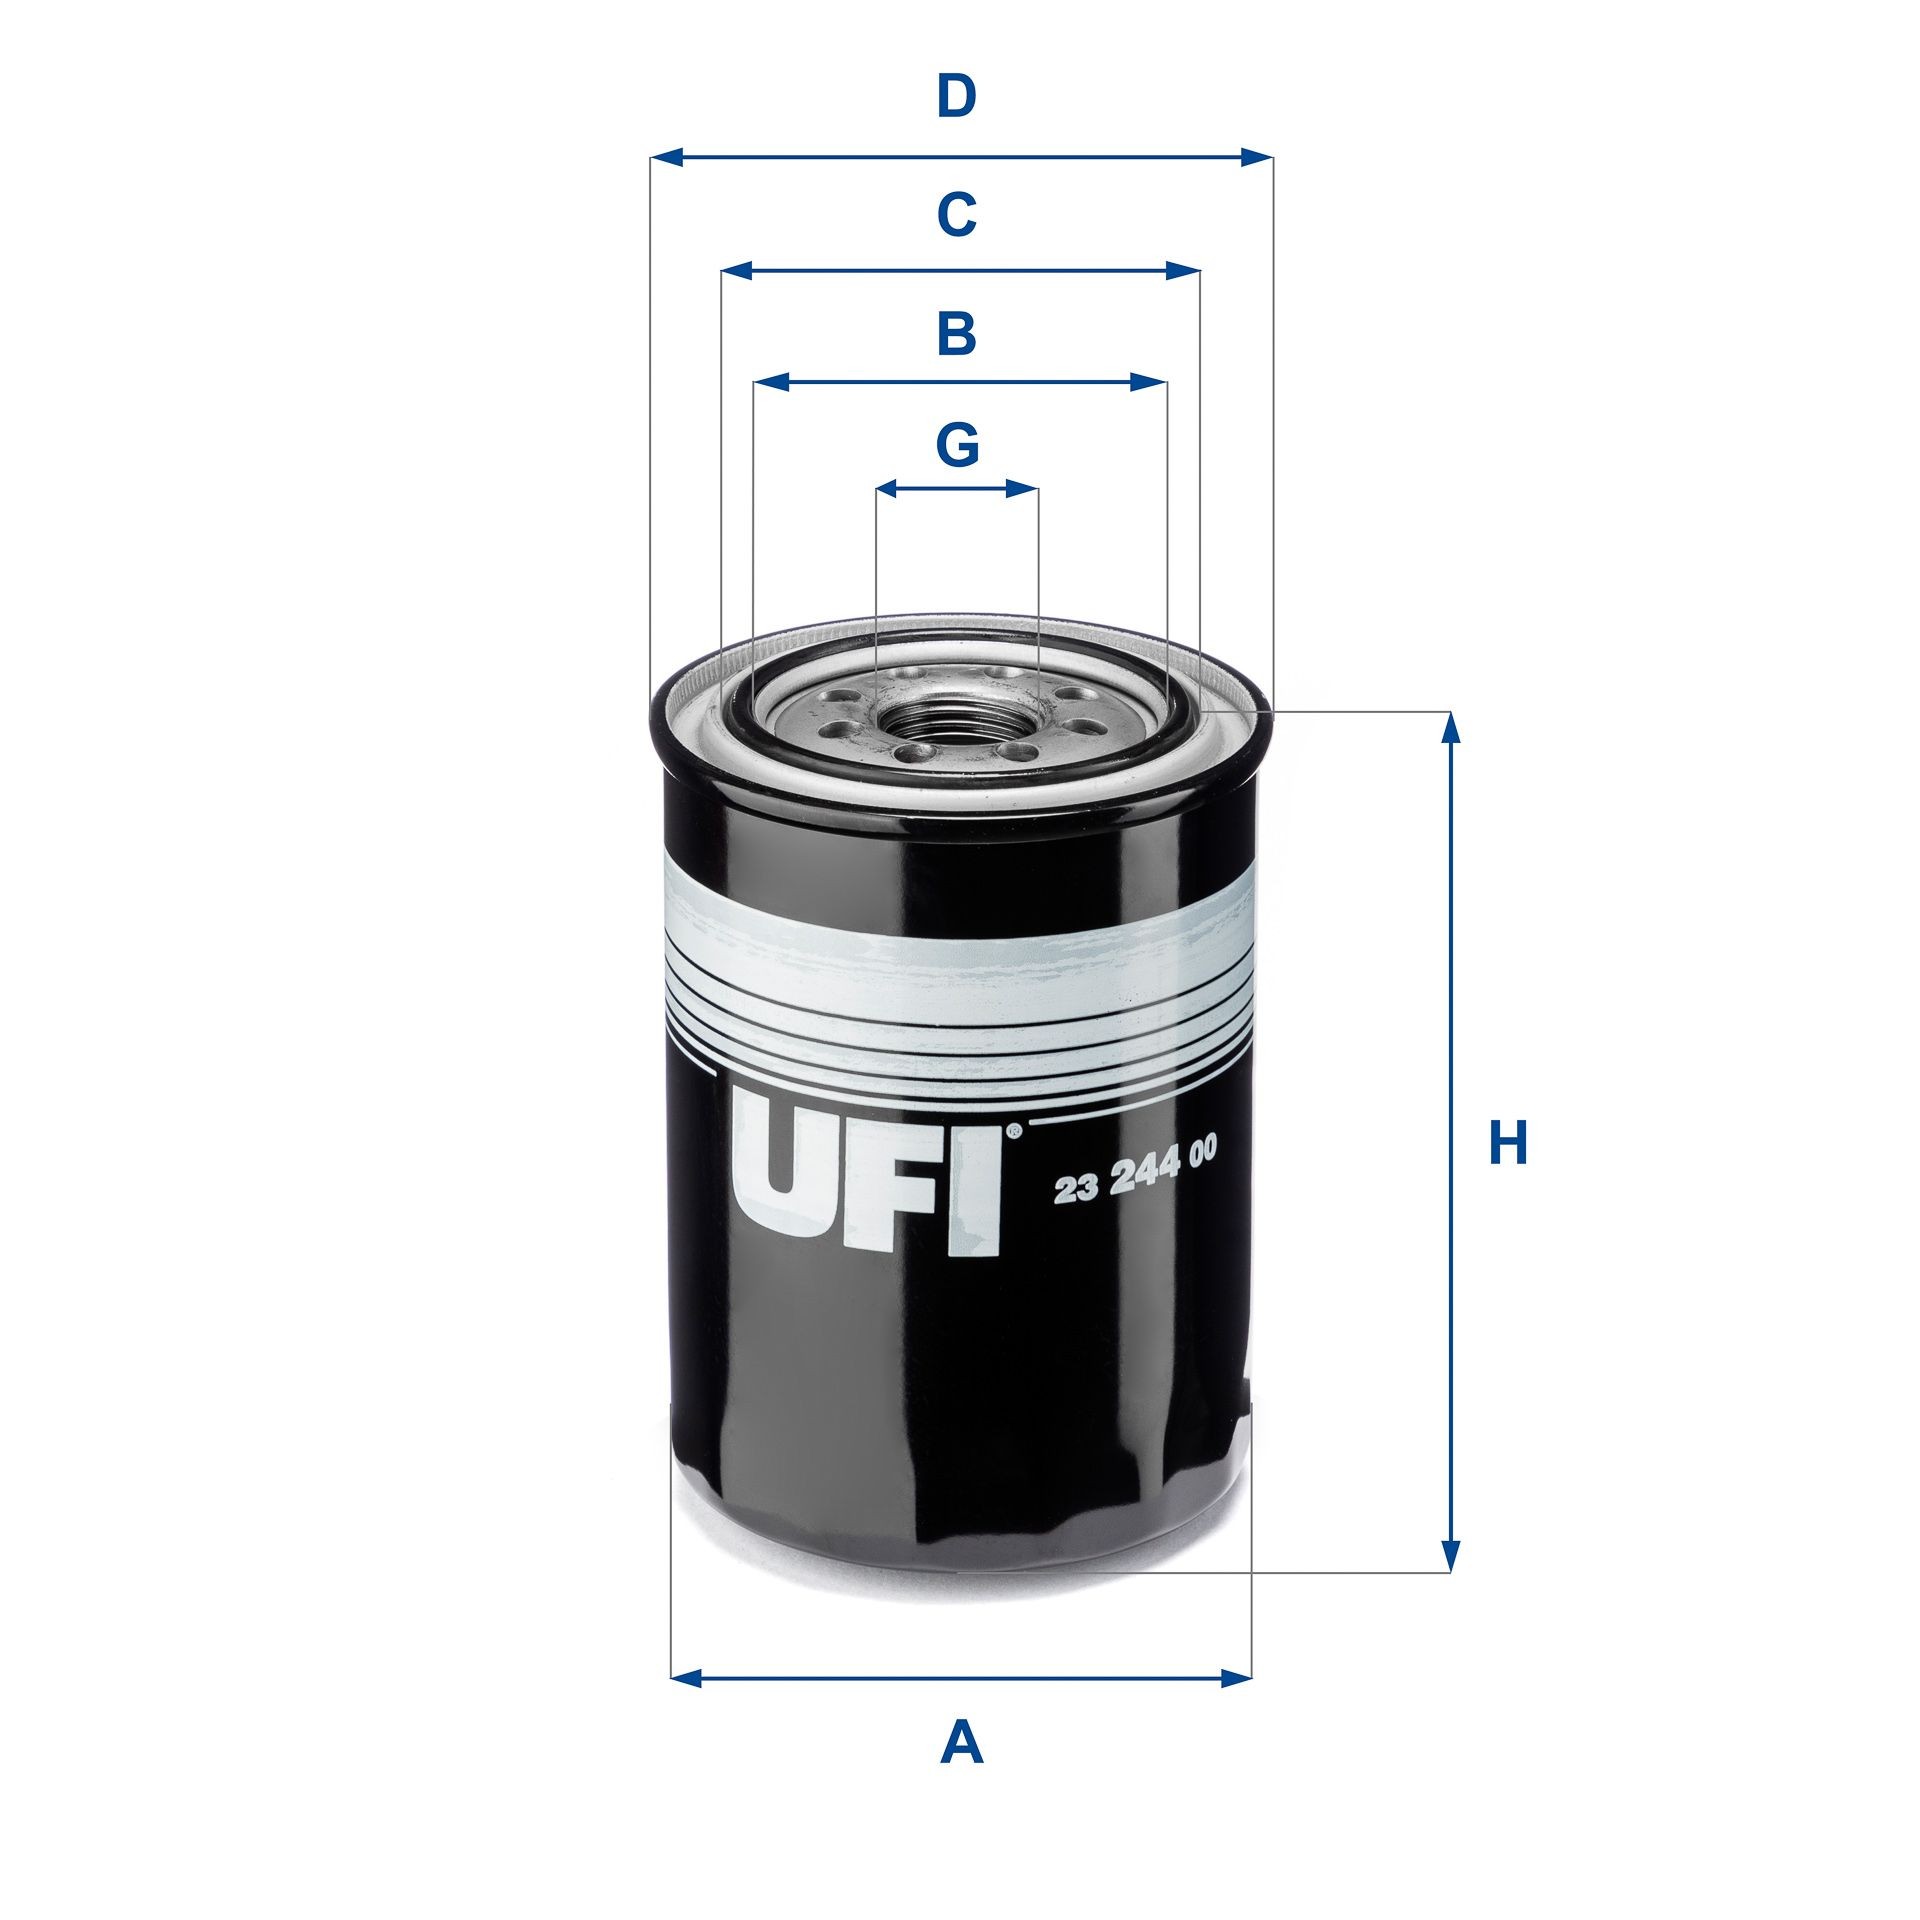 UFI 23.244.00 Oil filter 1-12 UNF, with one anti-return valve, Spin-on Filter